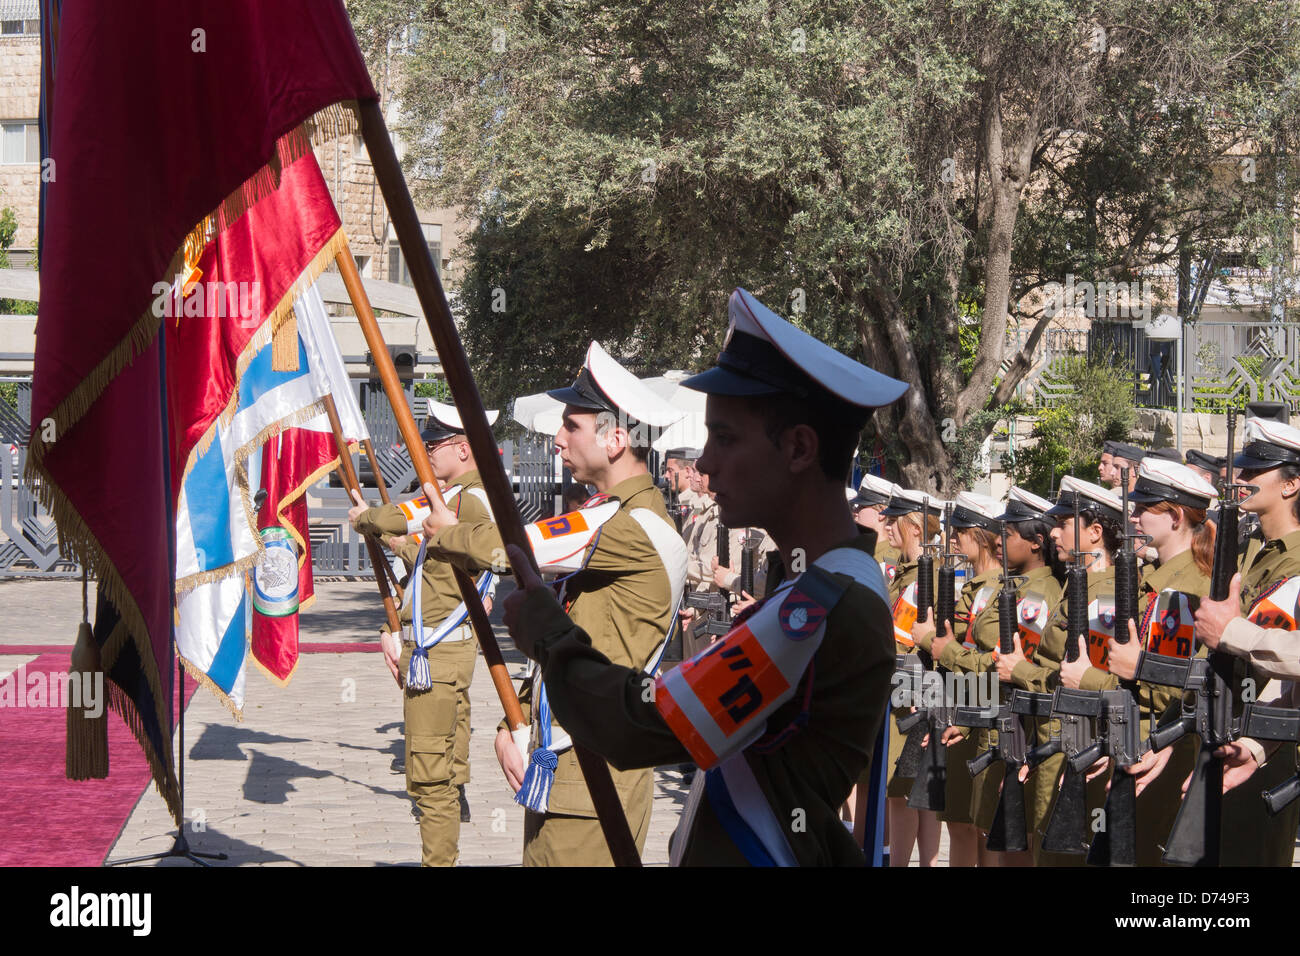 Jerusalem, Israel. 29-April-2013. An IDF honor guard and band welcome President of Israel, Shimon Peres, and President of Serbia, Tomislav Nicolic in the garden of the Presidents' Residence at an official ceremony. Jerusalem, Israel. 29-April-2013.  President Shimon Peres hosts an official state welcome reception for the President of Serbia, Tomislav Nicolic, at the President's Residence. The two discuss strengthening strategic relations and deepening economic, trade and diplomatic cooperation.Credit: Nir Alon/Alamy Live News Stock Photo